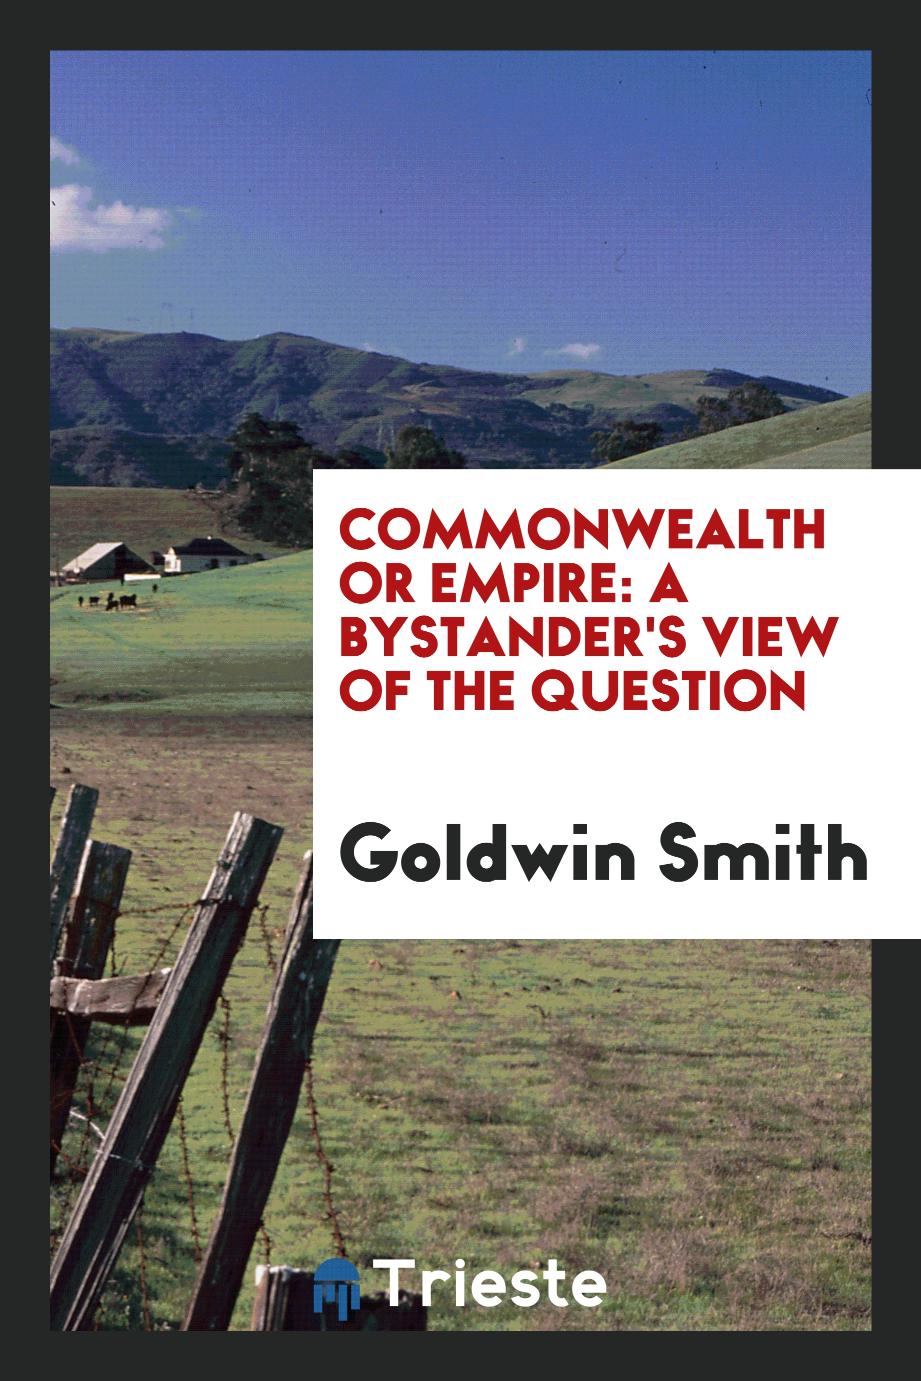 Commonwealth Or Empire: A Bystander's View of the Question